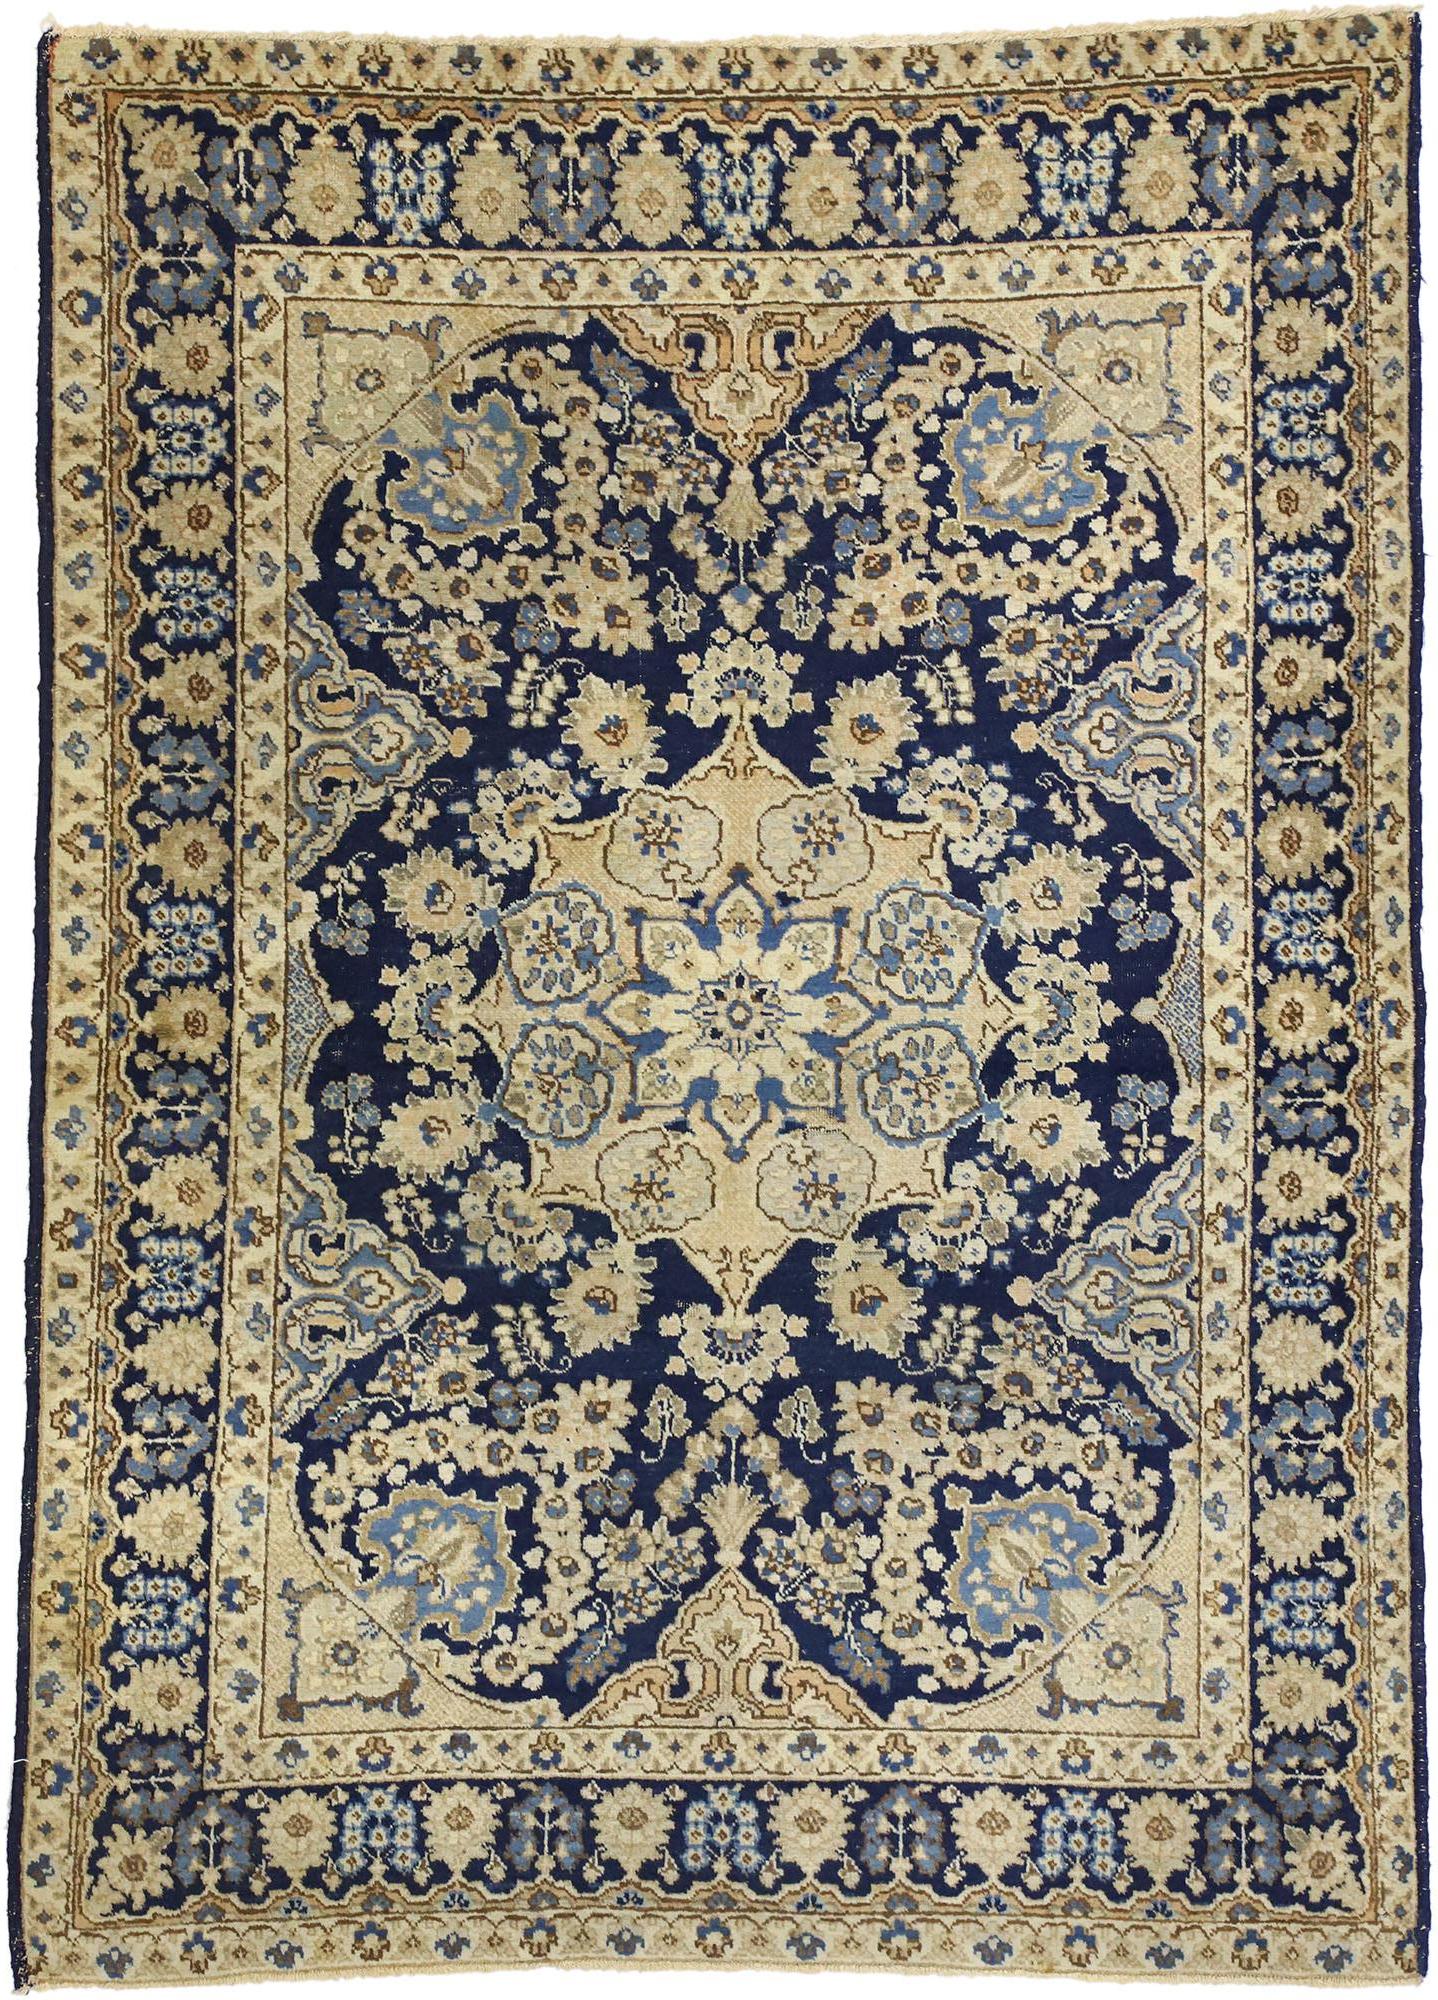 72737 Antique Persian Tabriz Rug with Hollywood Regency Style 04'06 x 06'02. This early 20th century antique Persian Tabriz rug with Hollywood Regency style with a twist of neoclassical glamour. Features a large center medallion in a navy blue field